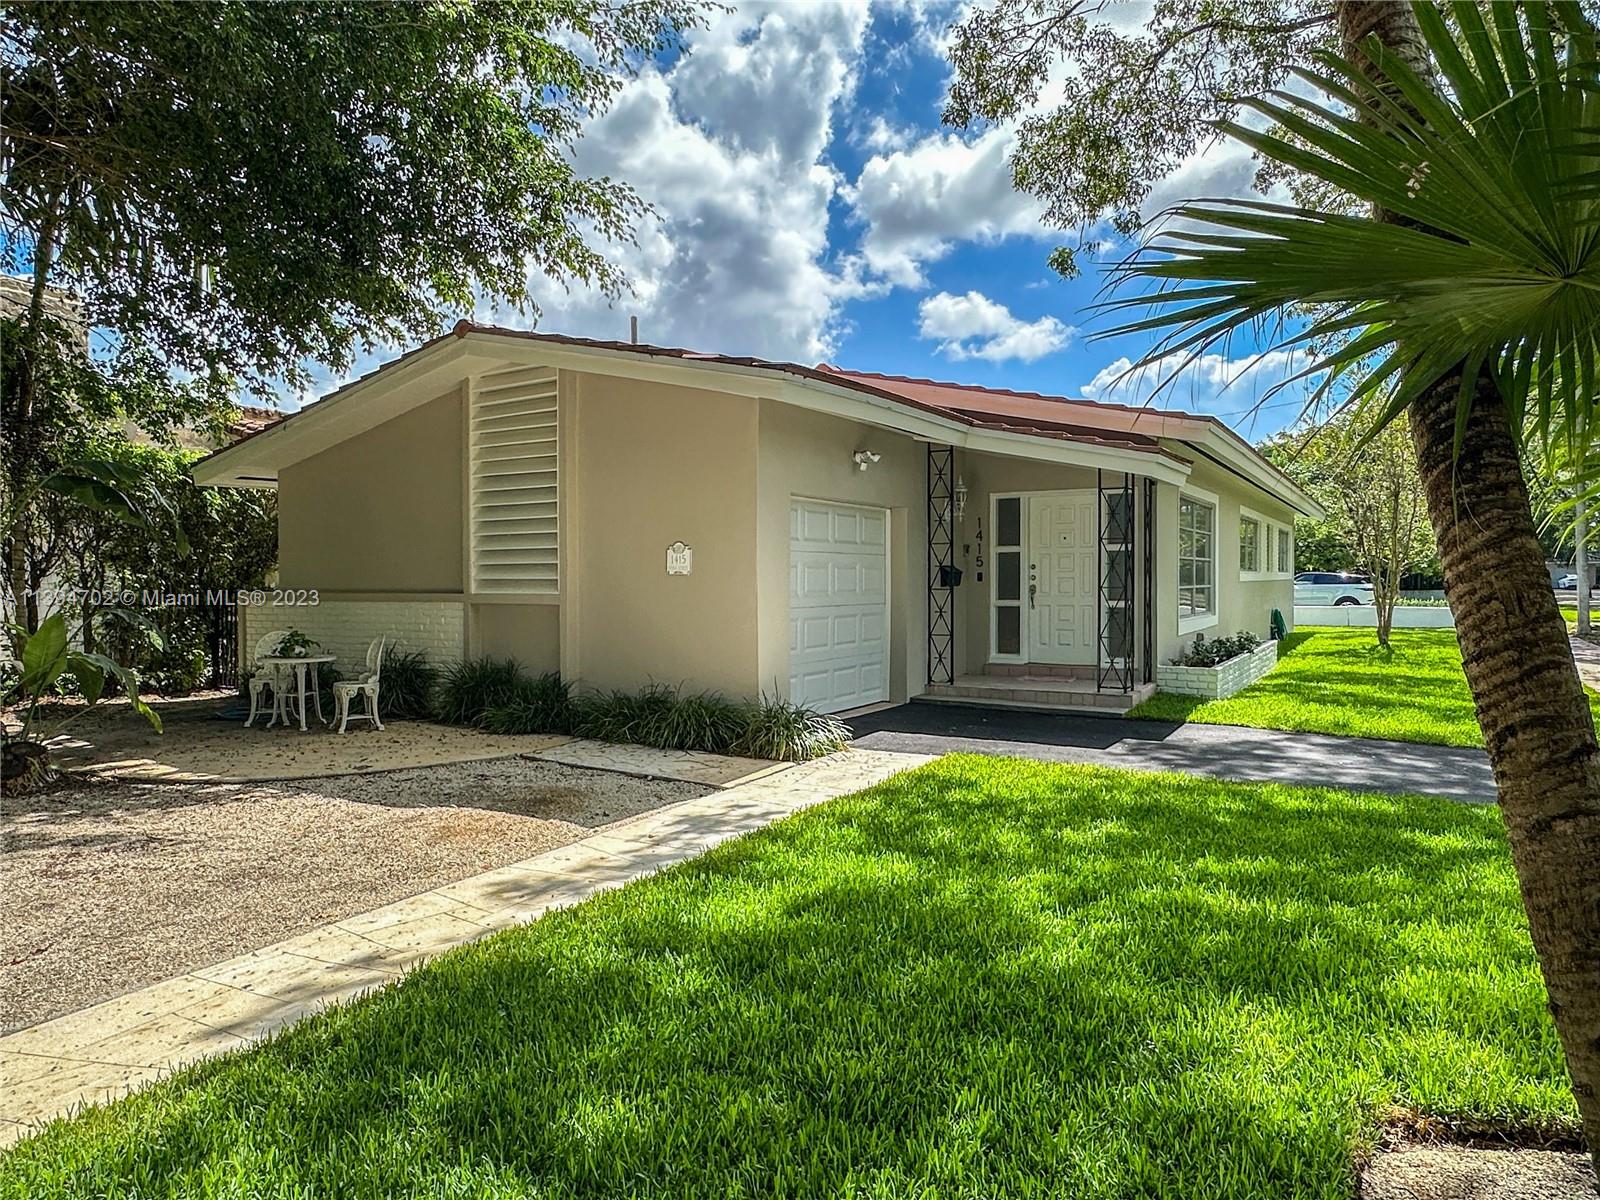 This inviting 3 bedroom 2 bath home is located on a quiet corner lot in North Coral Gables. The home is recently updated with new kitchen appliances and has generous space and distribution. The living room is bright and airy with a large windows that lets in plenty of natural light. The master bedroom is spacious and has a walk-in closet. The other two bedrooms are also comfortable and share a bathroom. The home has a one car garage where the washer and dryer are located. Close to schools, shopping, and restaurants.